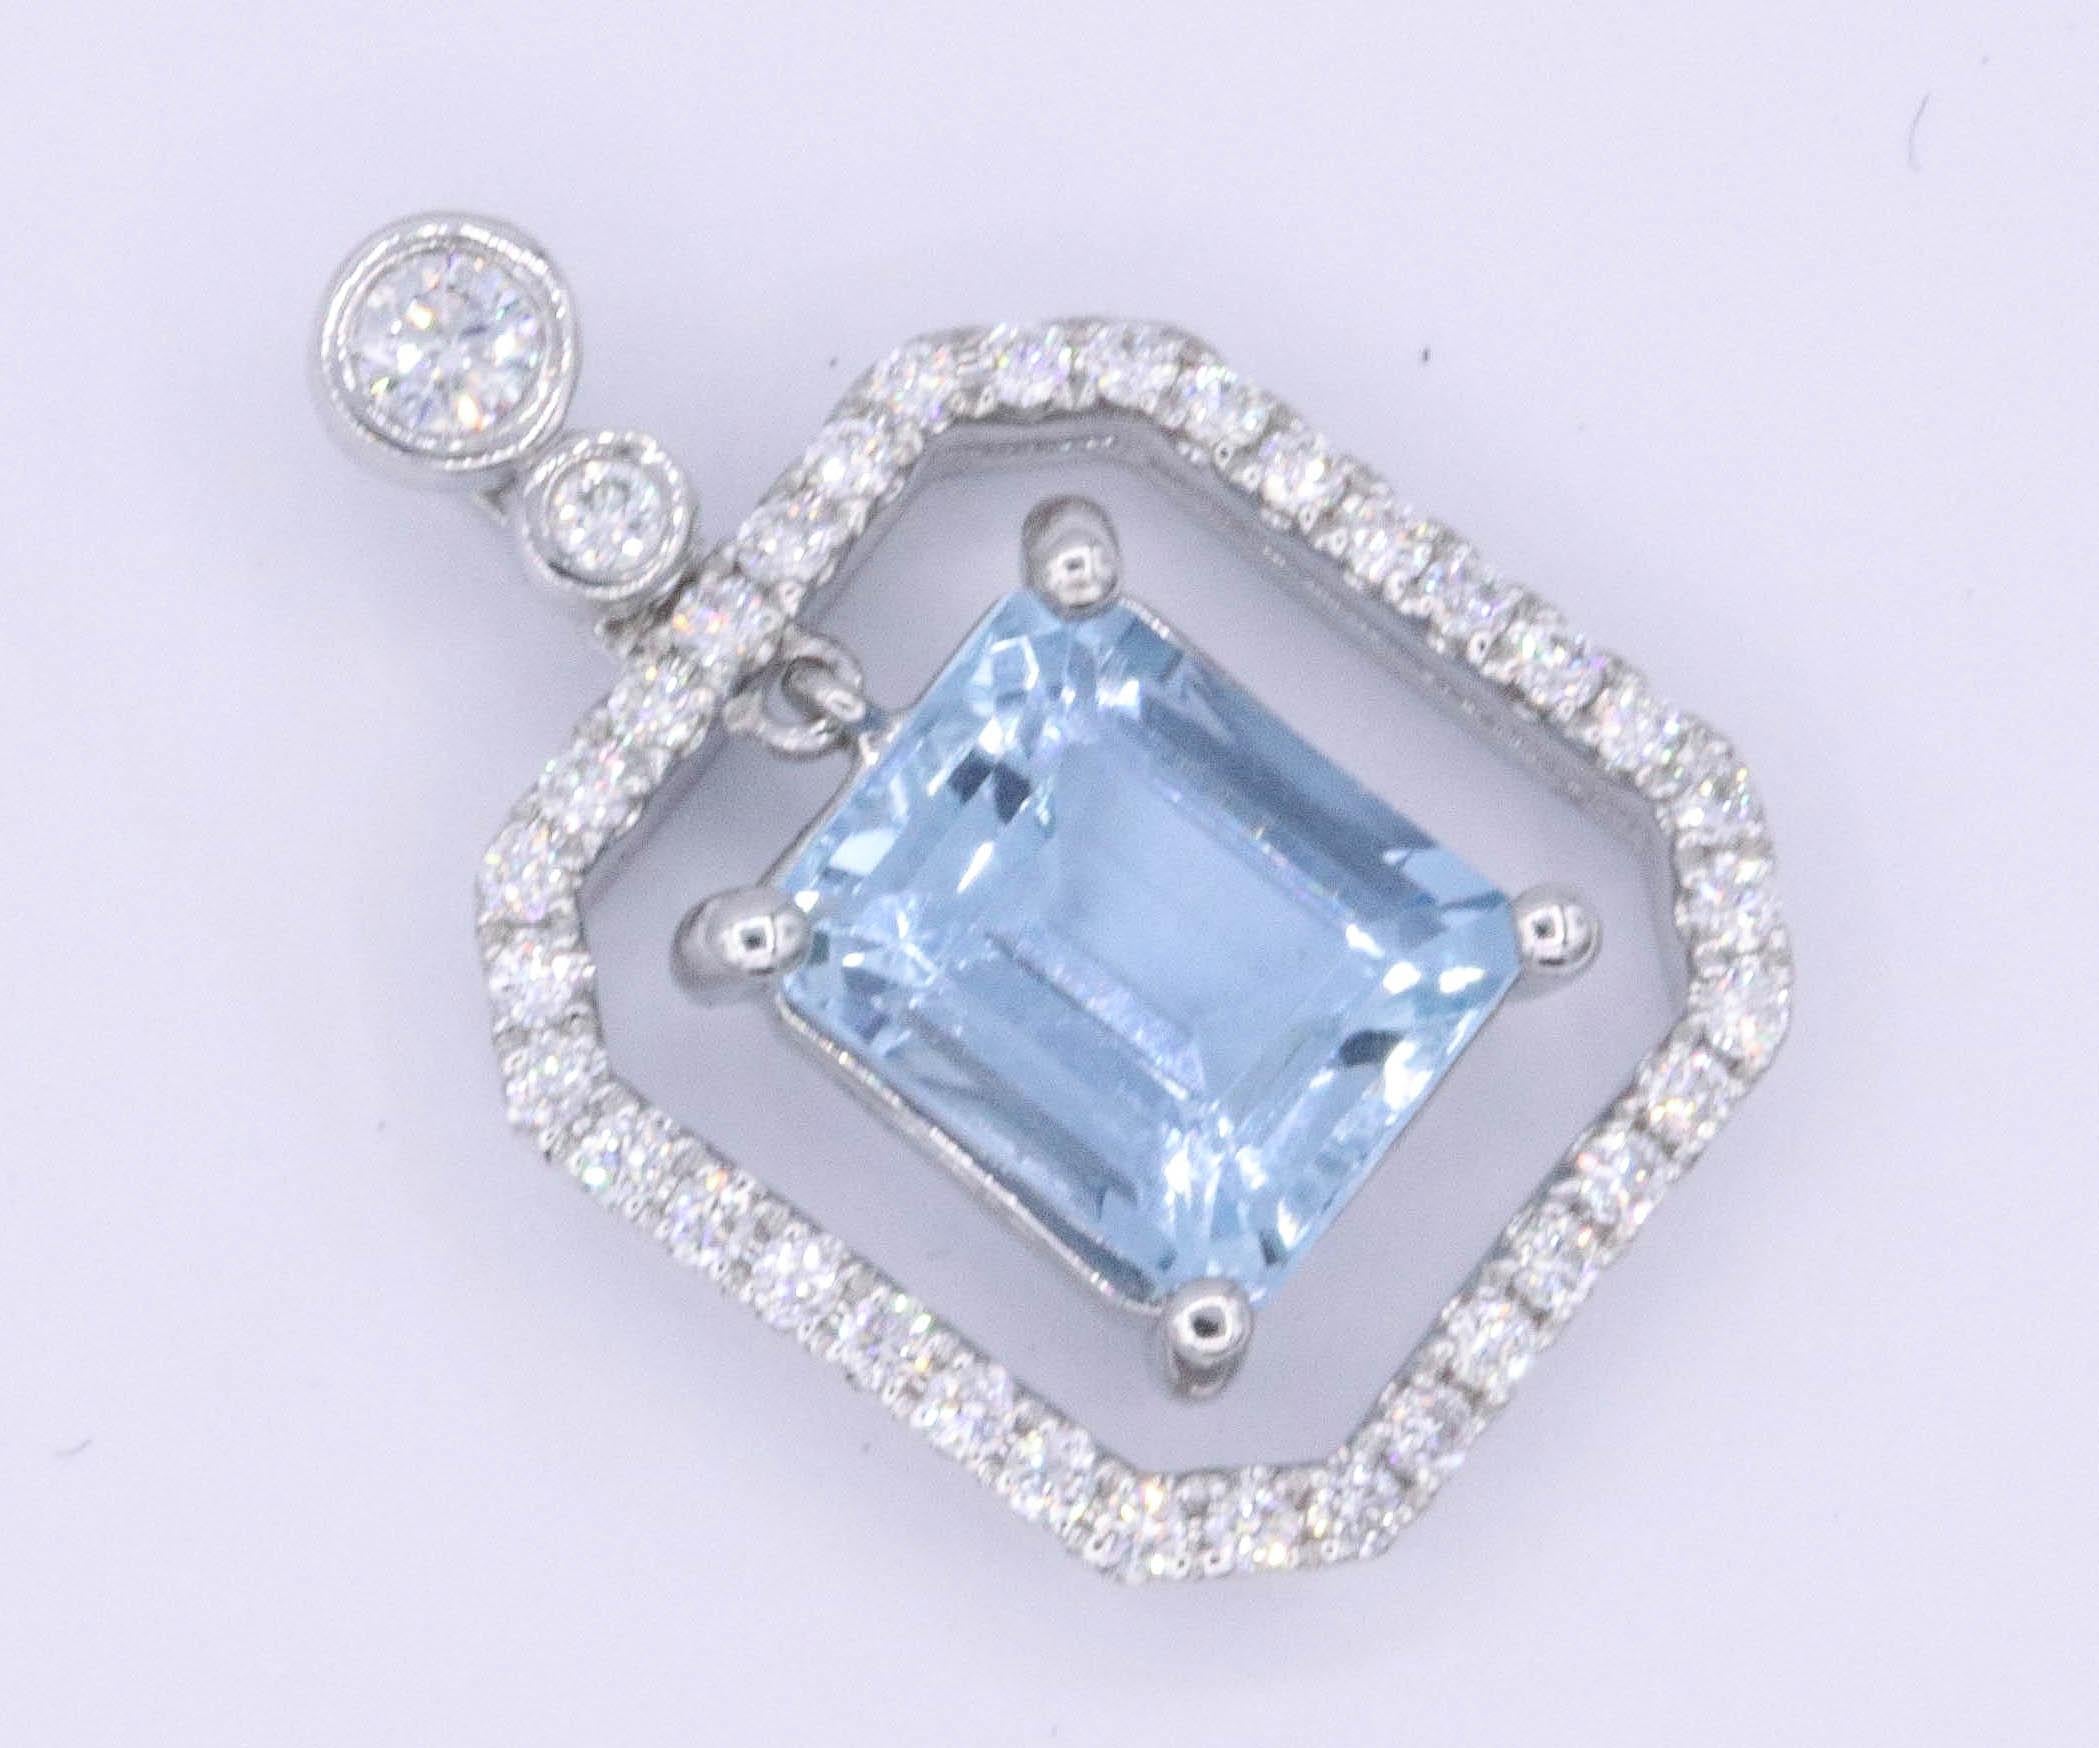 This beautiful Emerald cut Aquamarine is set in 14 K White Gold surrounded with 0.29 Carats of Diamonds.
The aquamarine weights 1.98 cts.
The emerald measures 8 x 6 mm